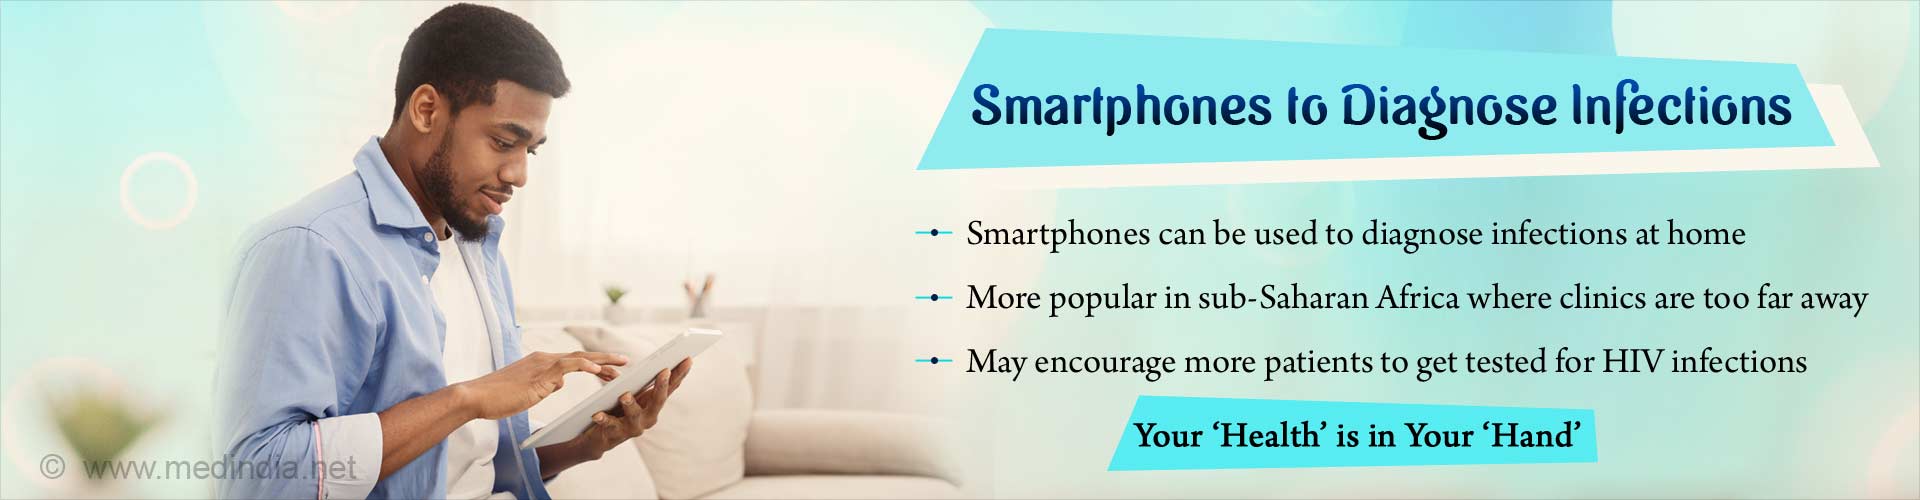 Smartphones to diagnose infections. Smartphones can be used to diagnose infections at home. More popular in sub-Saharan African where clinics are too far away. May encourage more patients to get tested for HIV infections. Your health is in your hand.